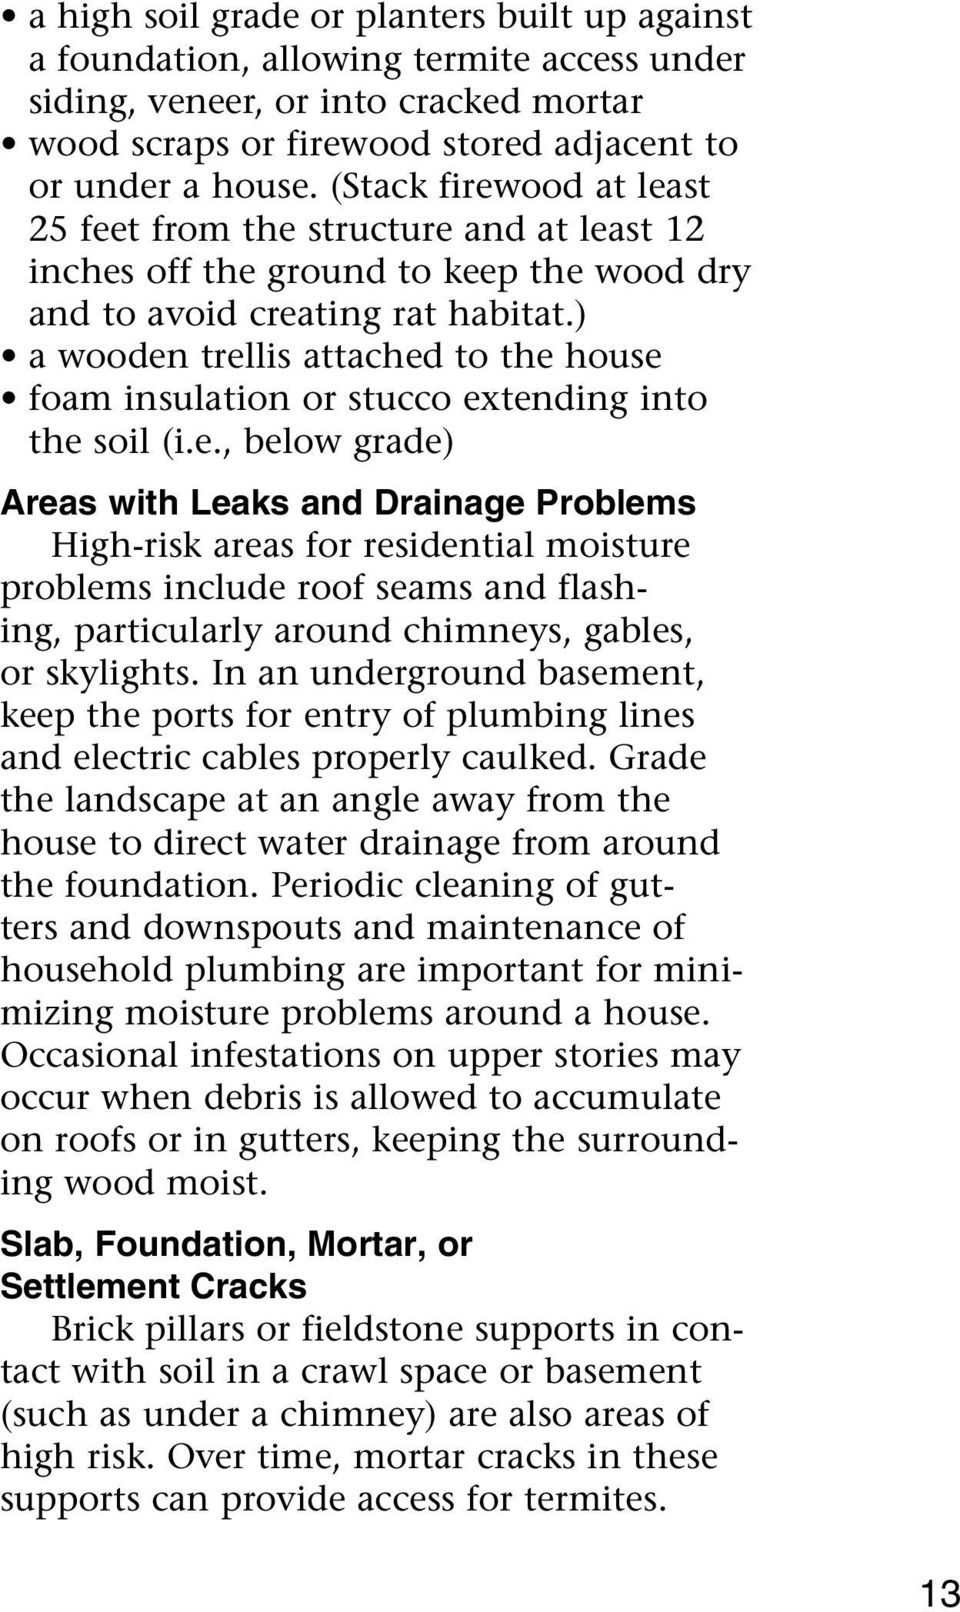 ) a wooden trellis attached to the house foam insulation or stucco extending into the soil (i.e., below grade) Areas with Leaks and Drainage Problems High-risk areas for residential moisture problems include roof seams and flashing, particularly around chimneys, gables, or skylights.